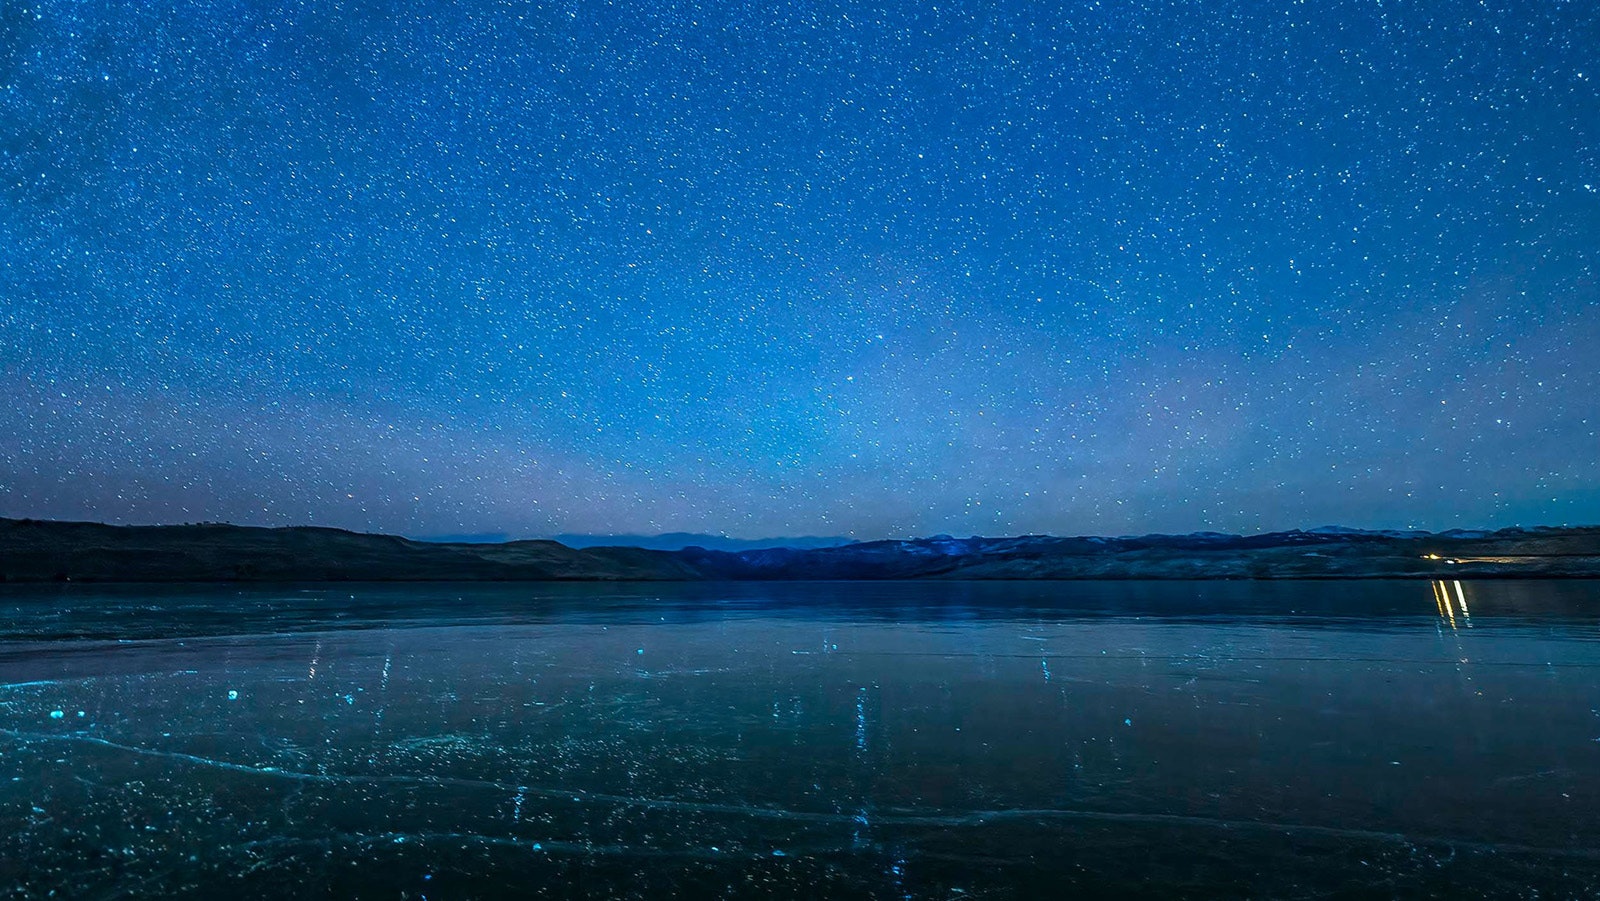 The edge of a perfectly clear sheet of ice on Fremont Lake is just visible under the stars of a cold Wyoming night.